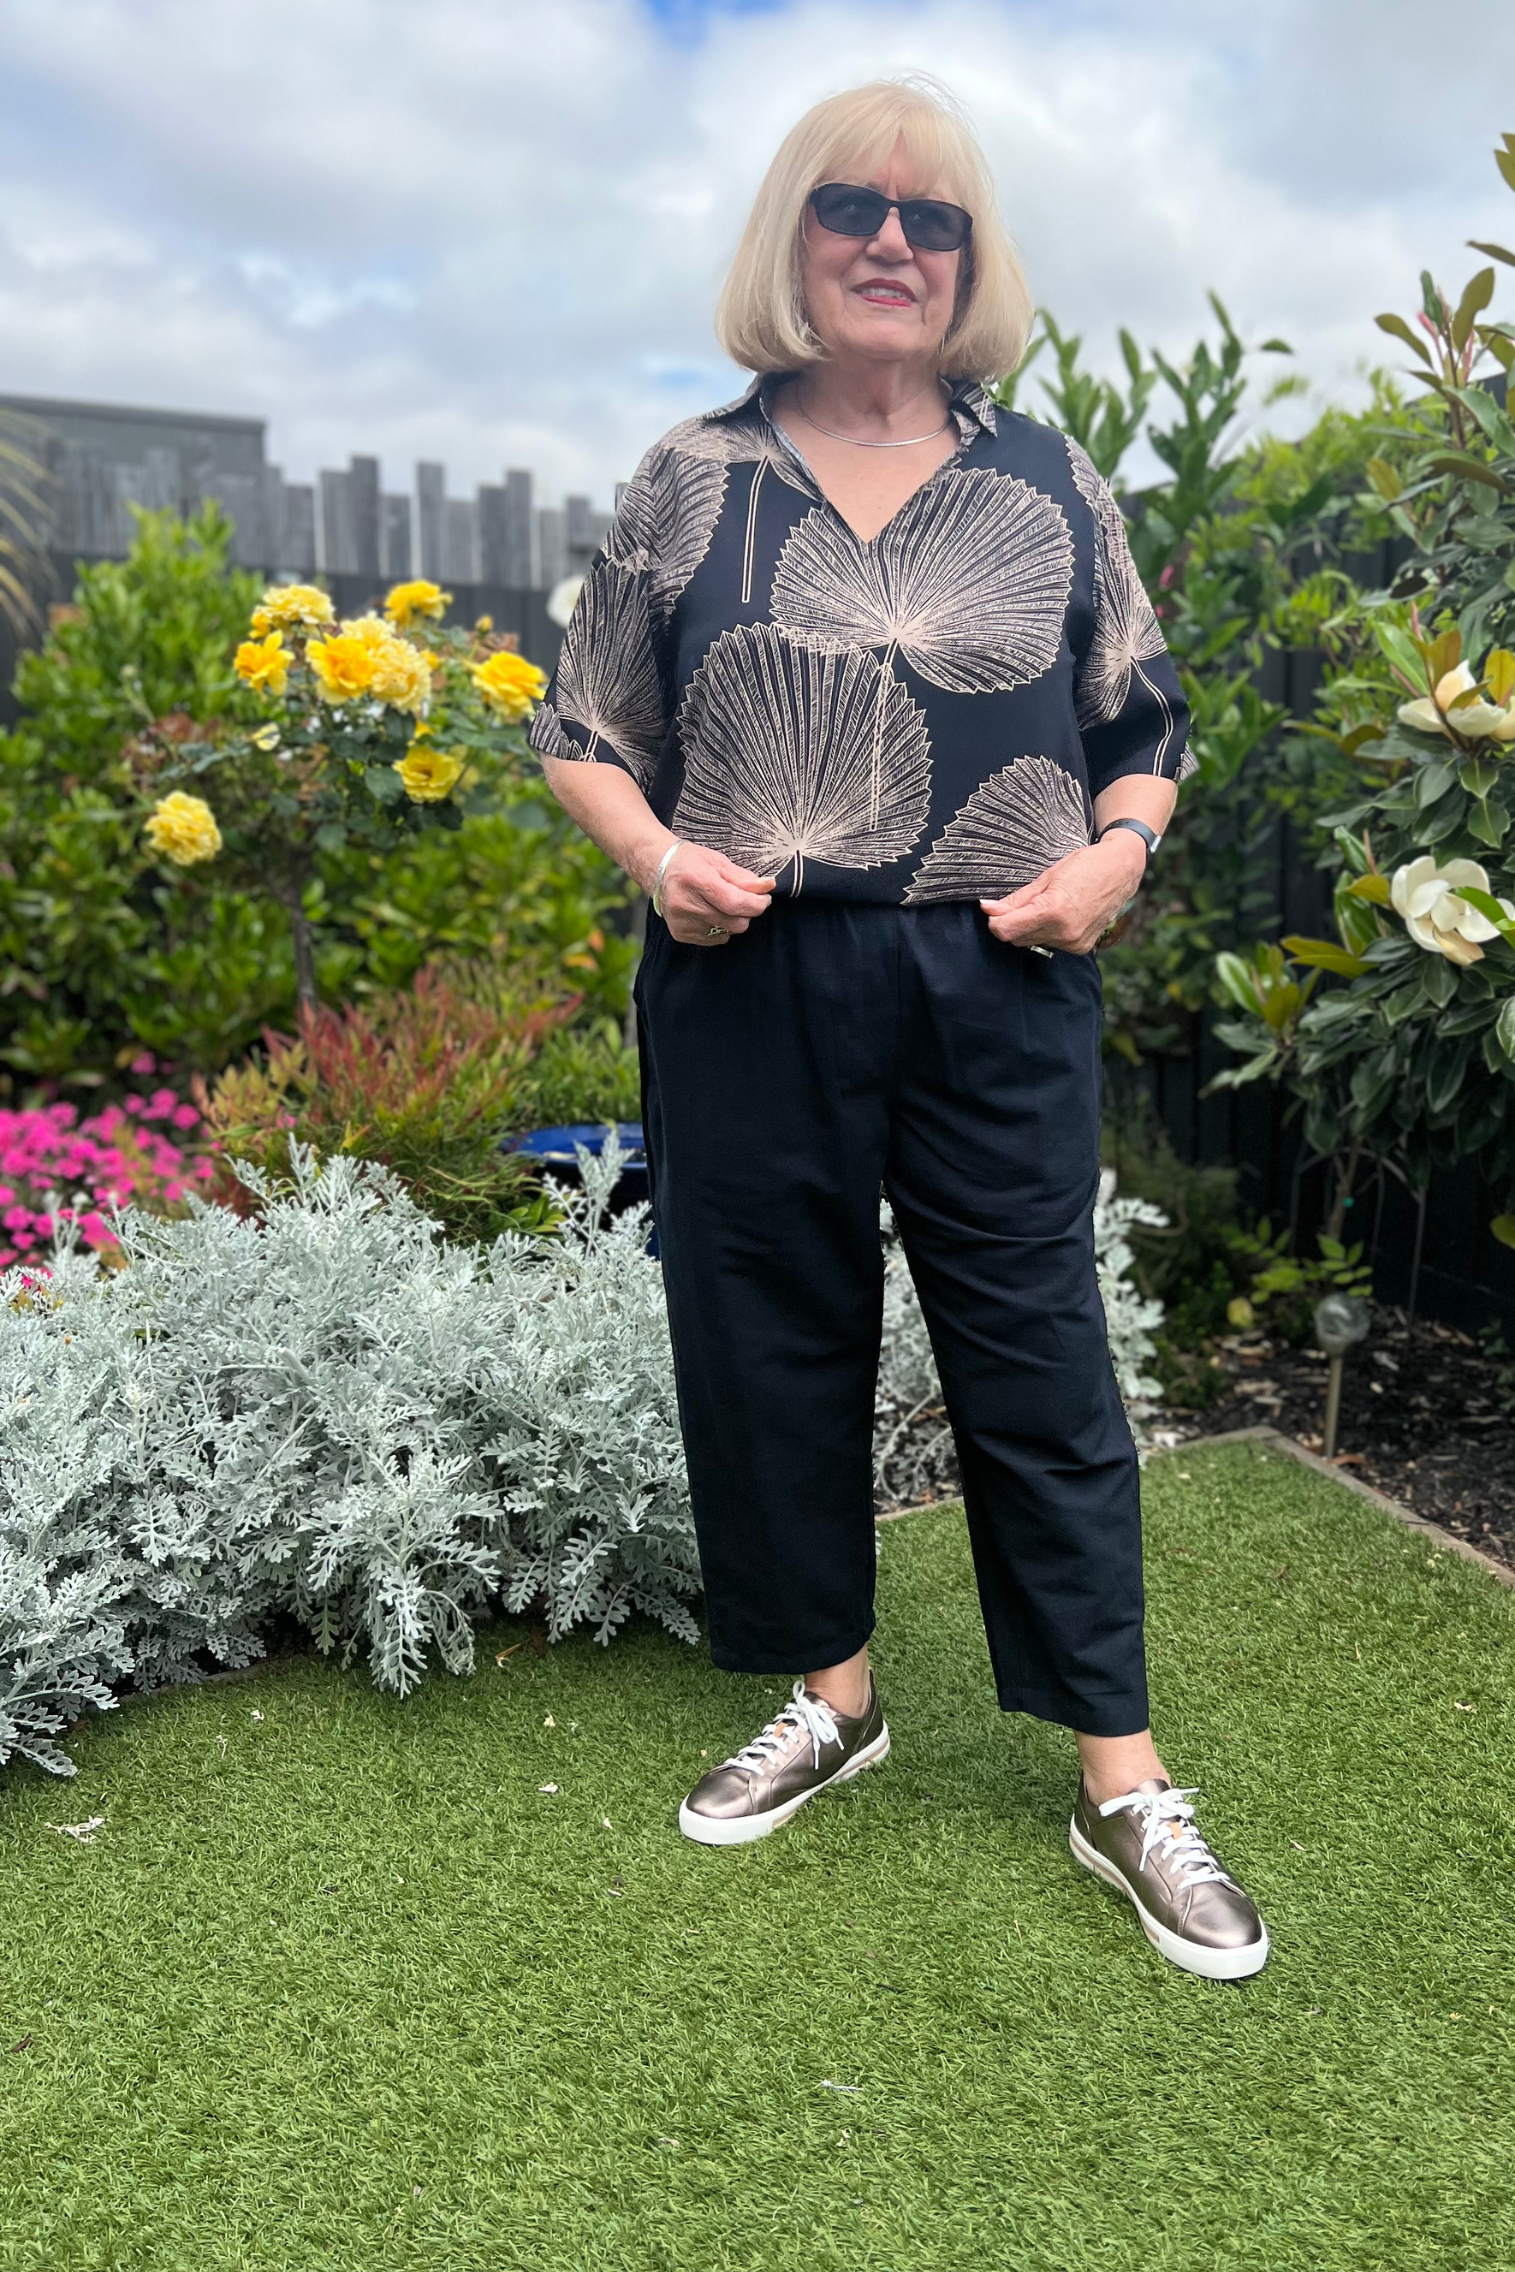 Kita Ku modelling the cotton black pant port with a top rebecca in Paolo print, and set in a sunny garden.